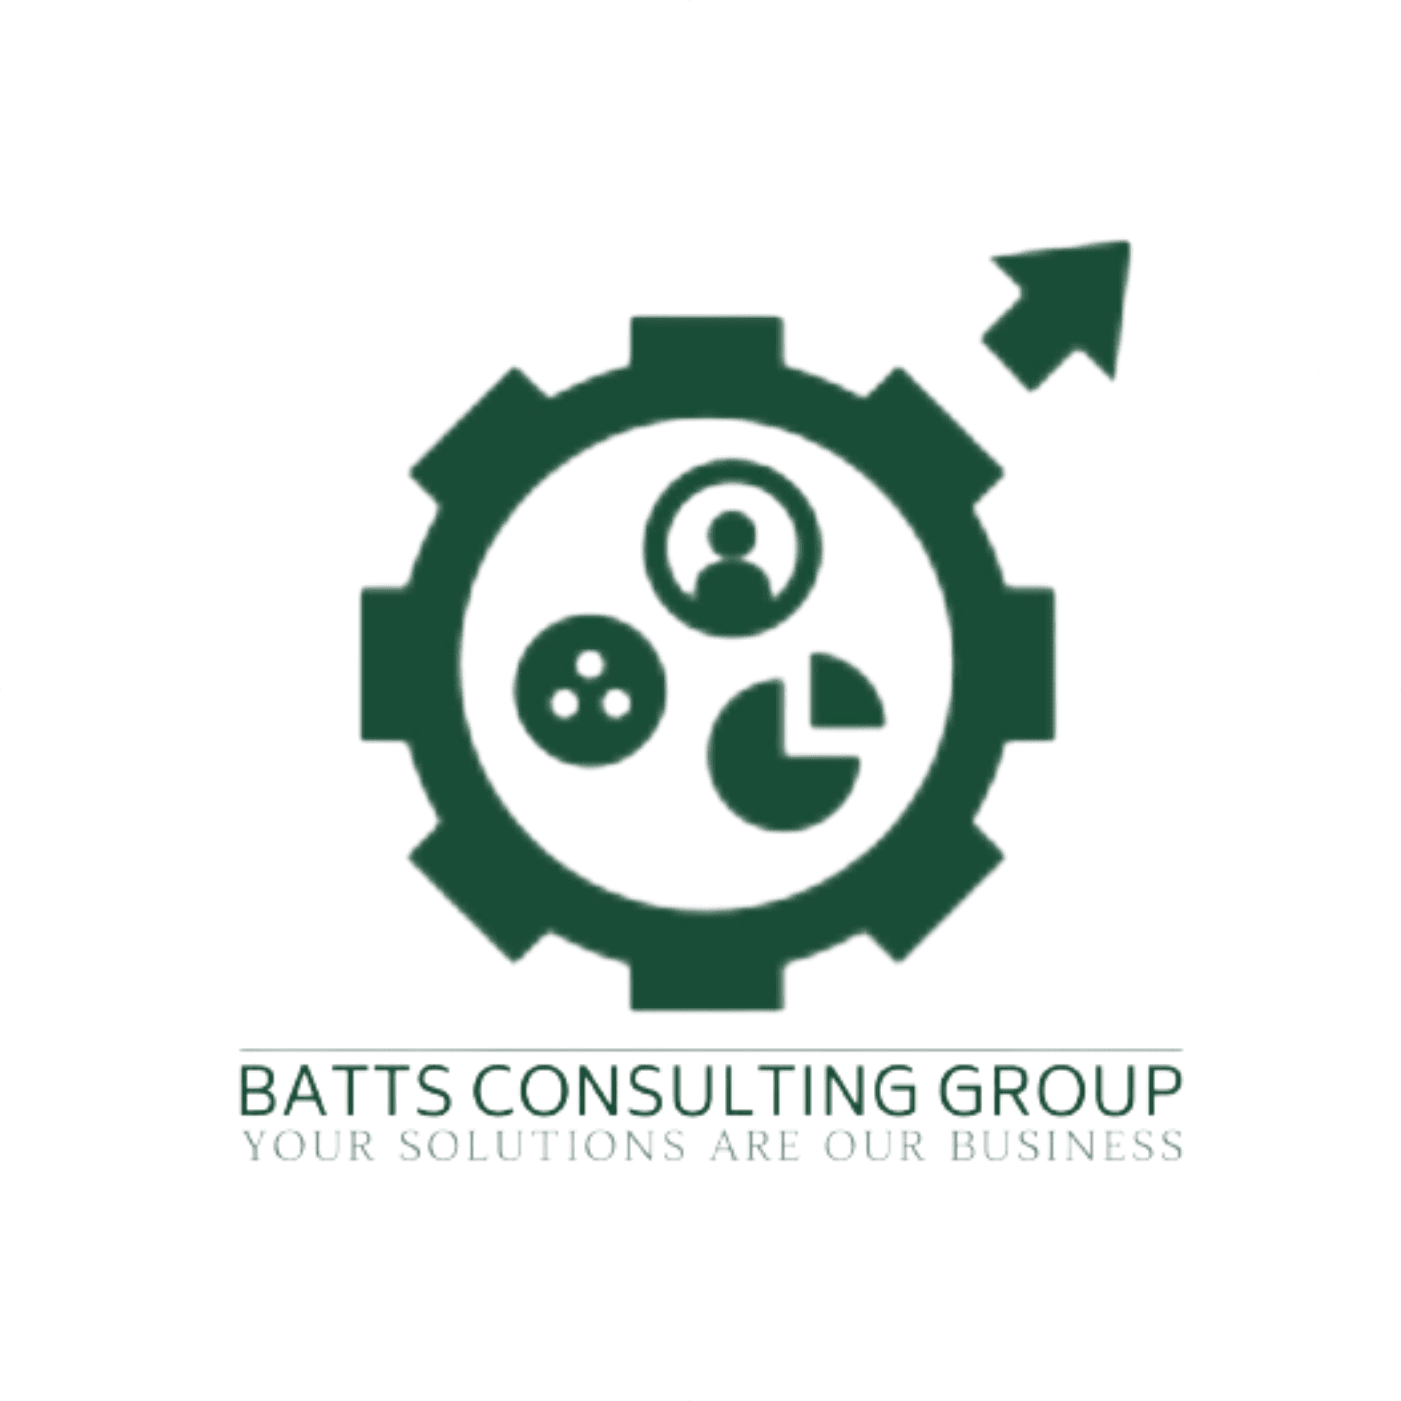 Batts Consulting Group